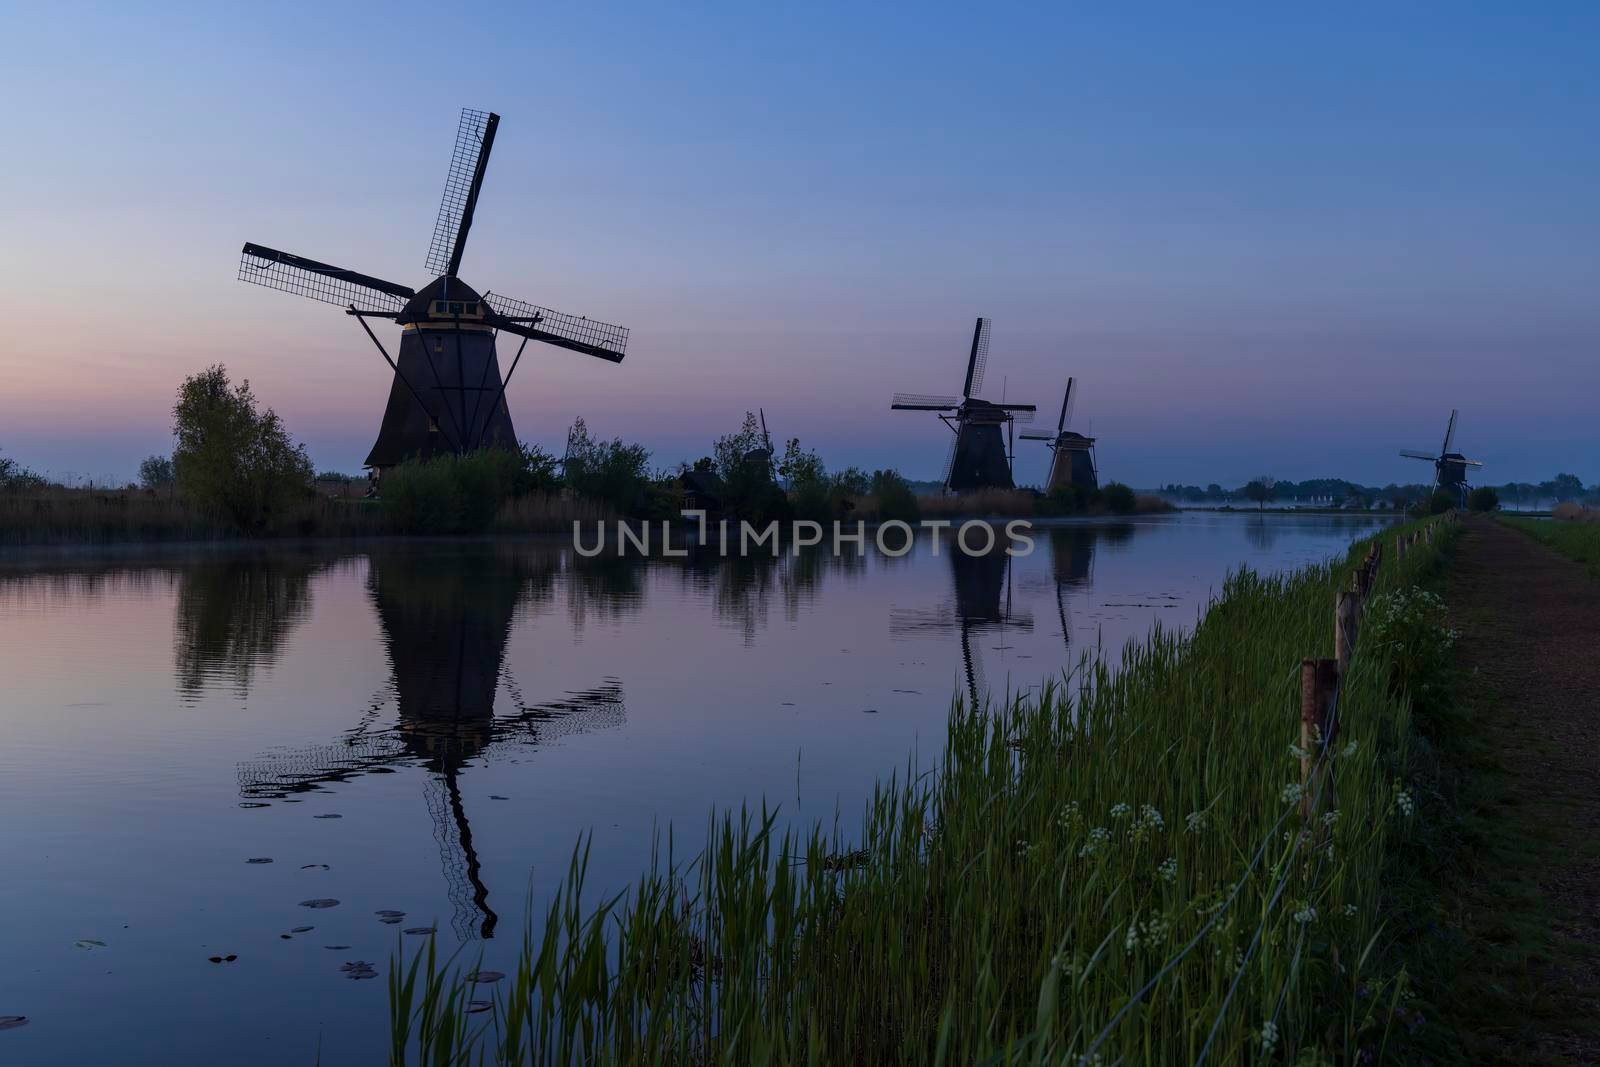 Traditional Dutch windmills with a colourful sky just before sunrise in Kinderdijk, The Netherlands by phbcz